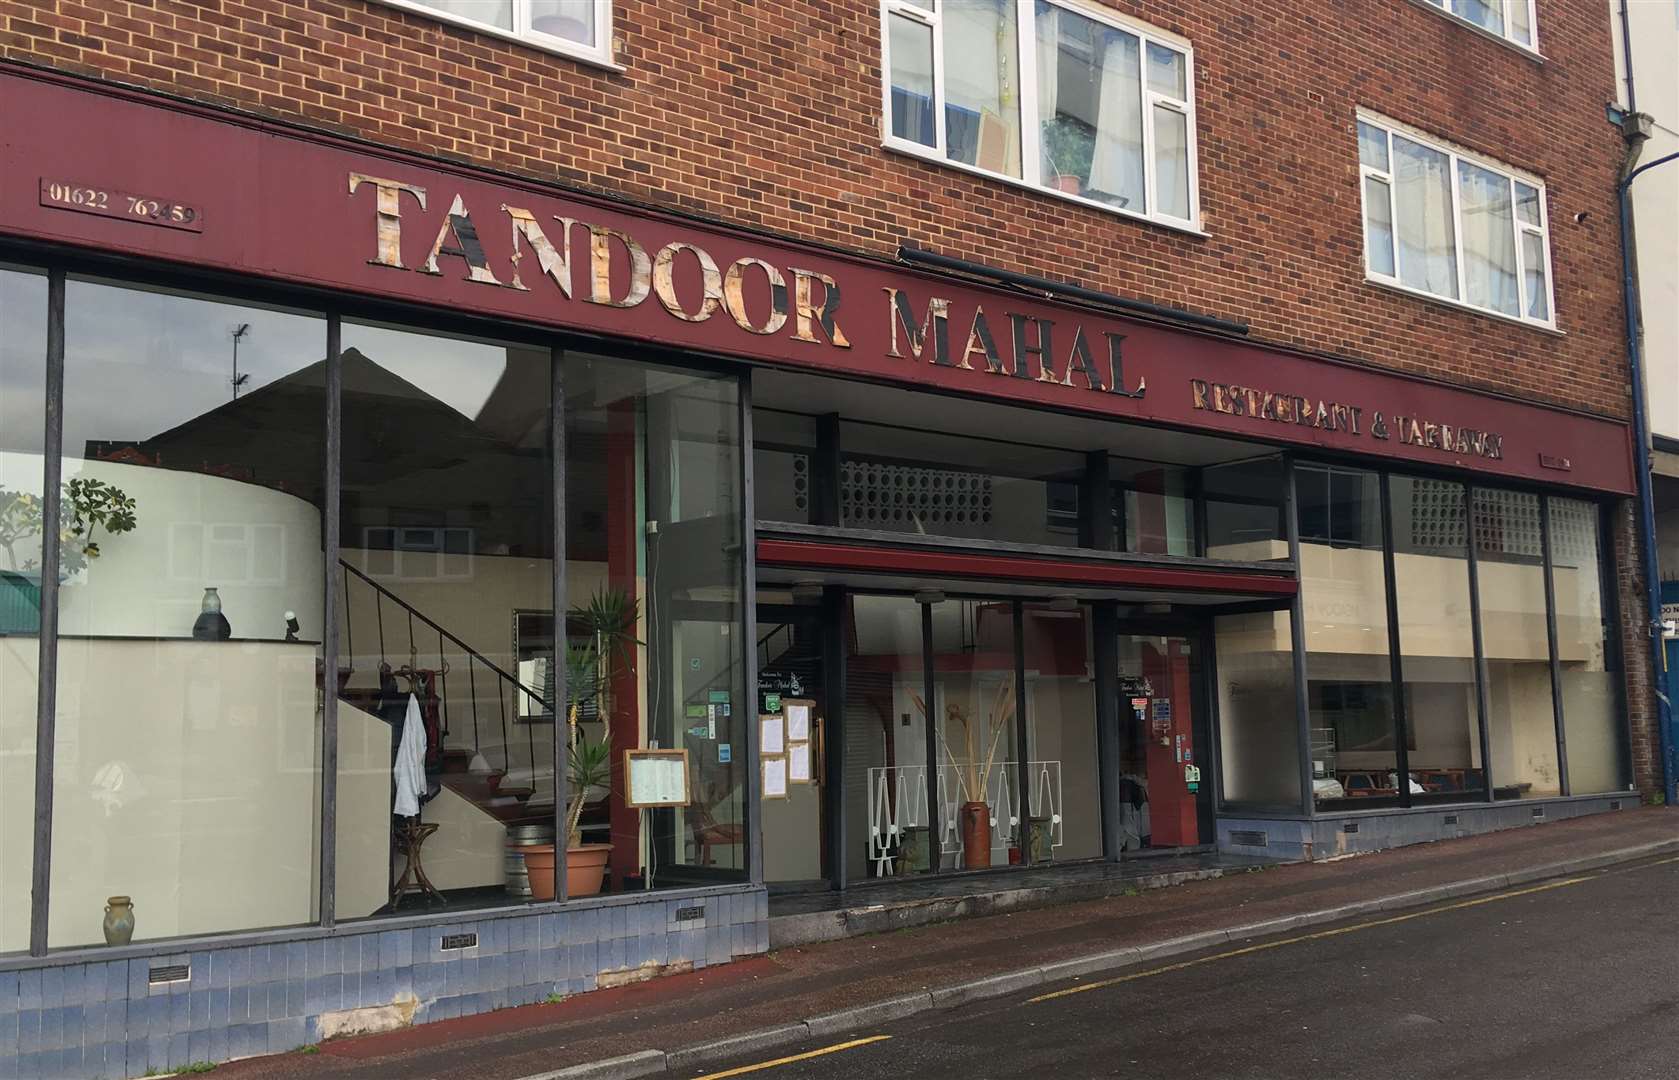 Tandoor Mahal in Medway Street, Maidstone, is closed until further notice after cockroach infestation was discovered